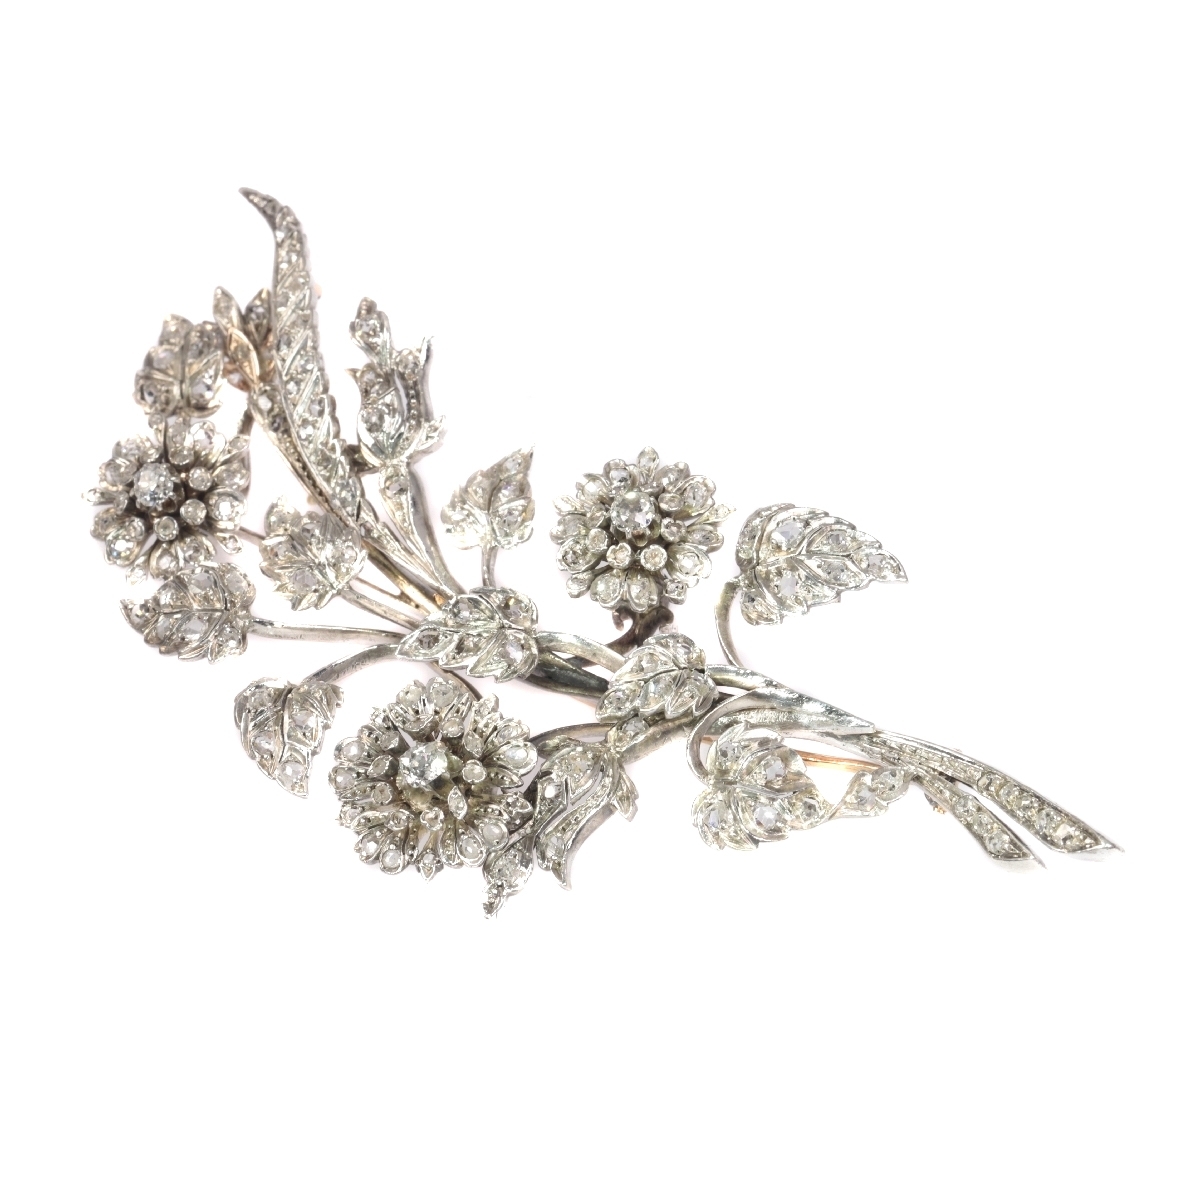 Antique French diamond branch brooch with 165 diamonds